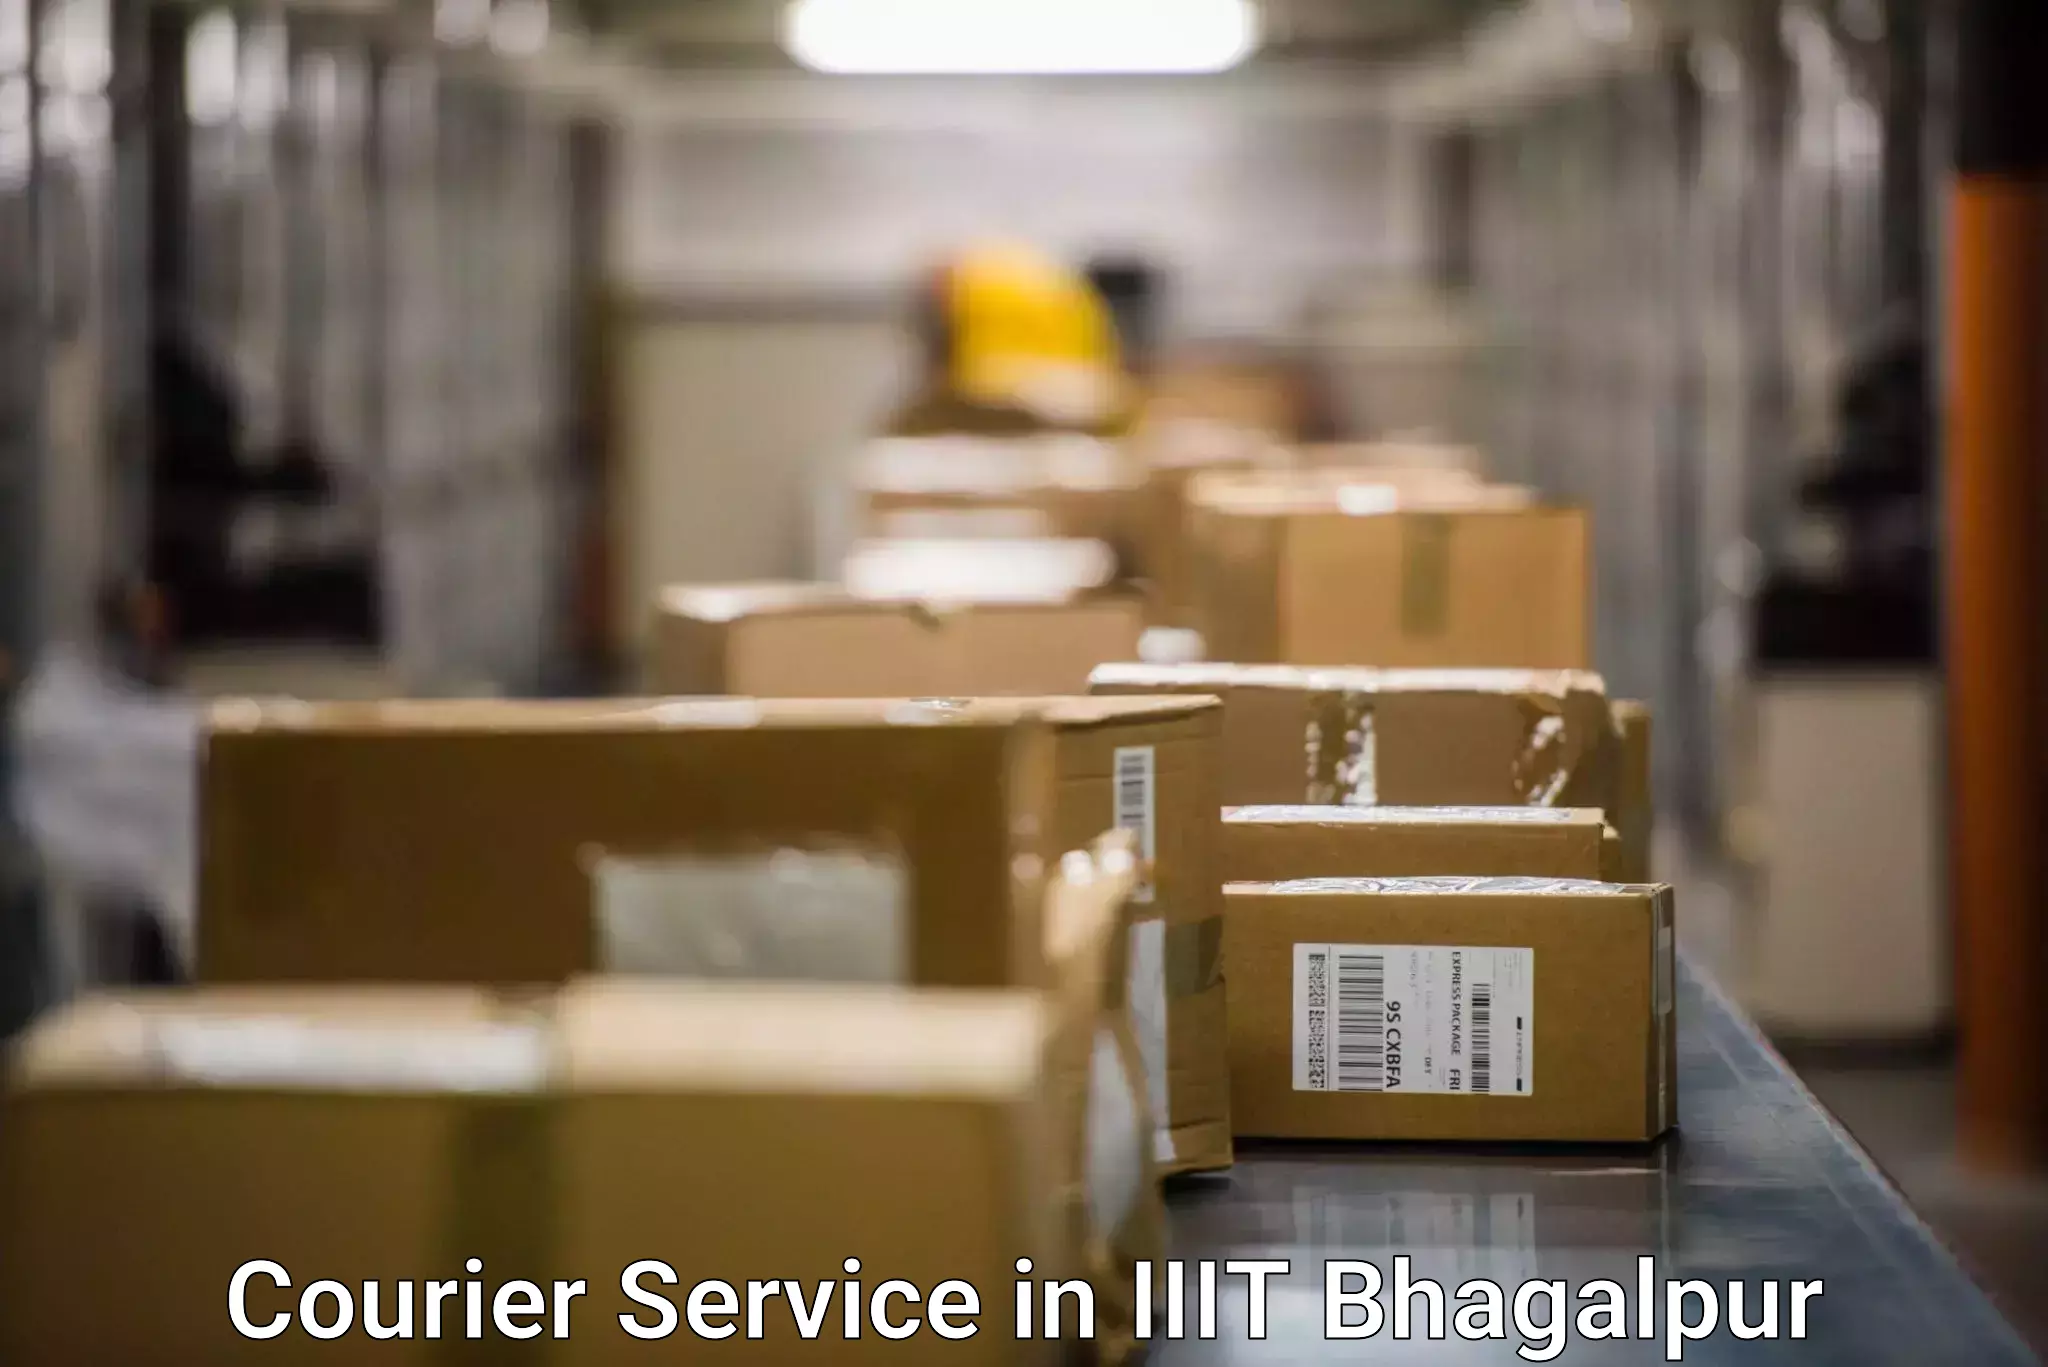 End-to-end delivery in IIIT Bhagalpur